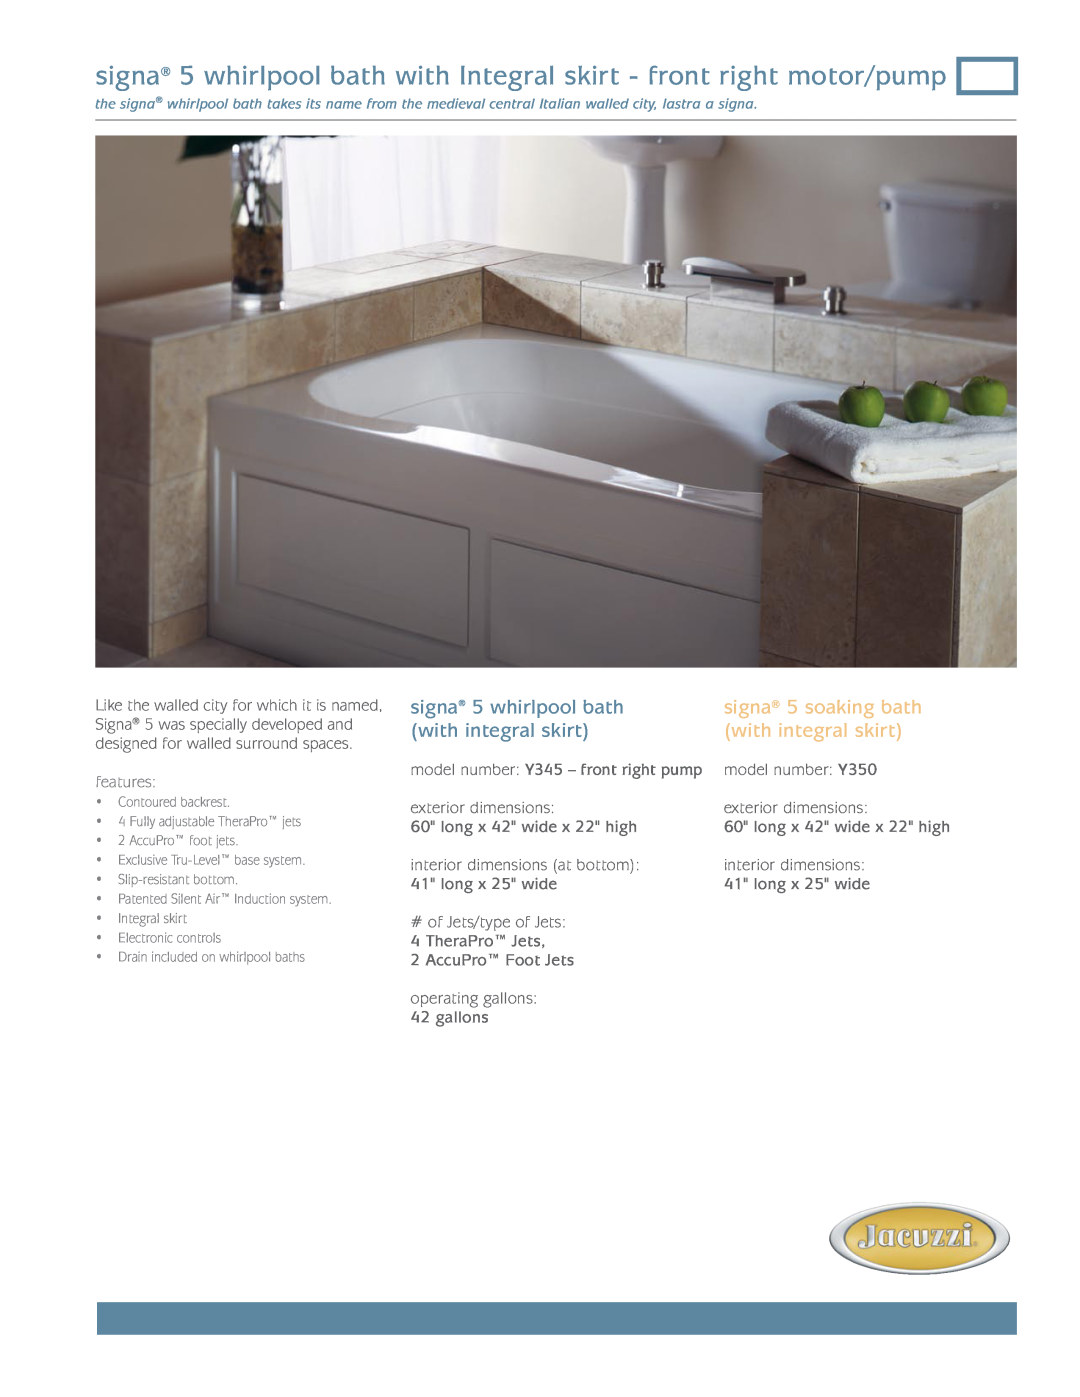 Jacuzzi Y345 dimensions signa 5 whirlpool bath with Integral skirt - front right motor/pump, signa 5 soaking bath 